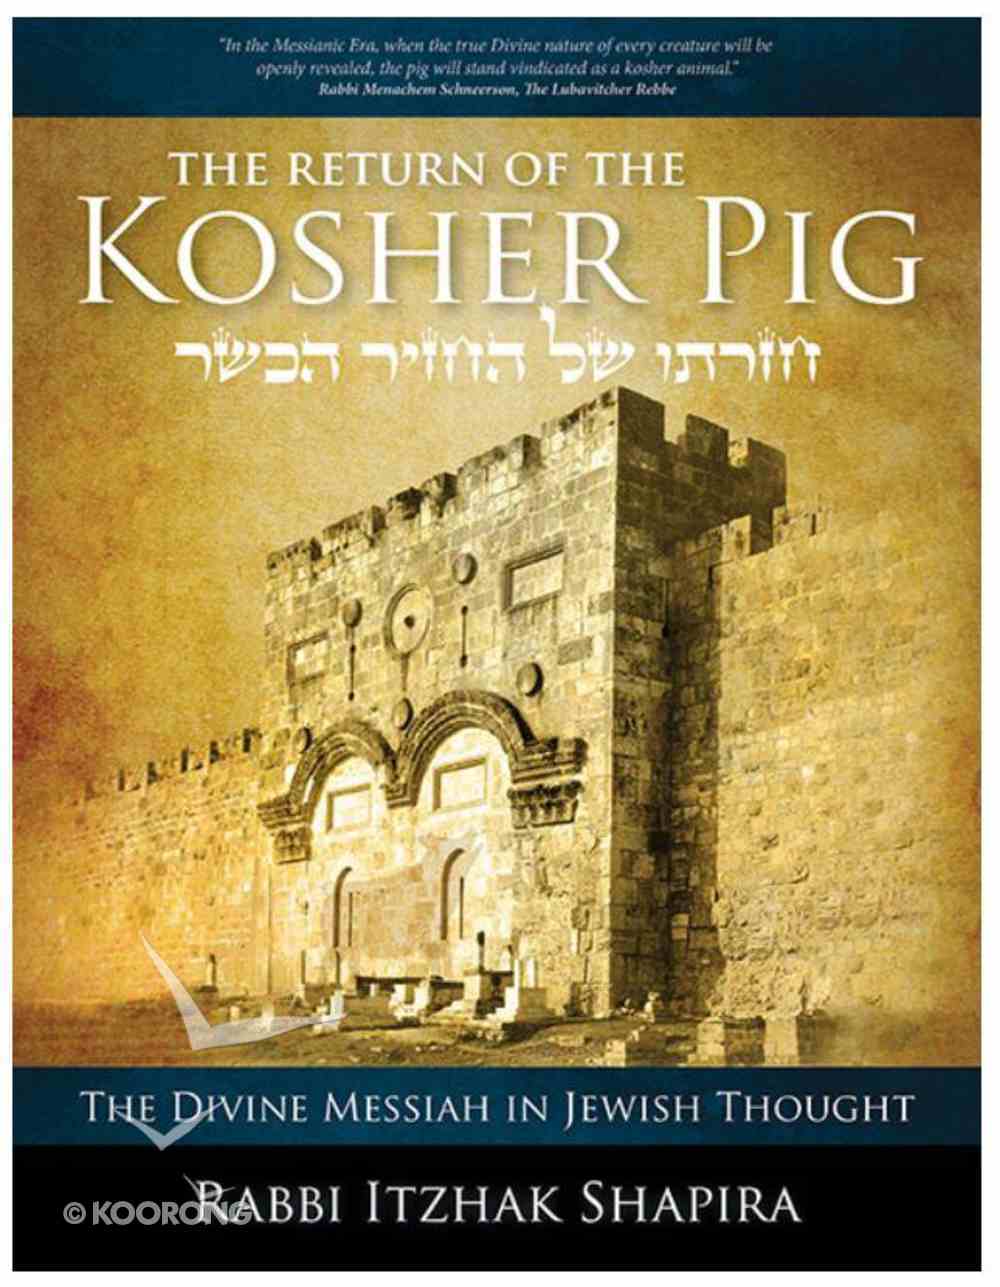 The Return of the Kosher Pig: The Divine Messiah in Jewish Thought Paperback